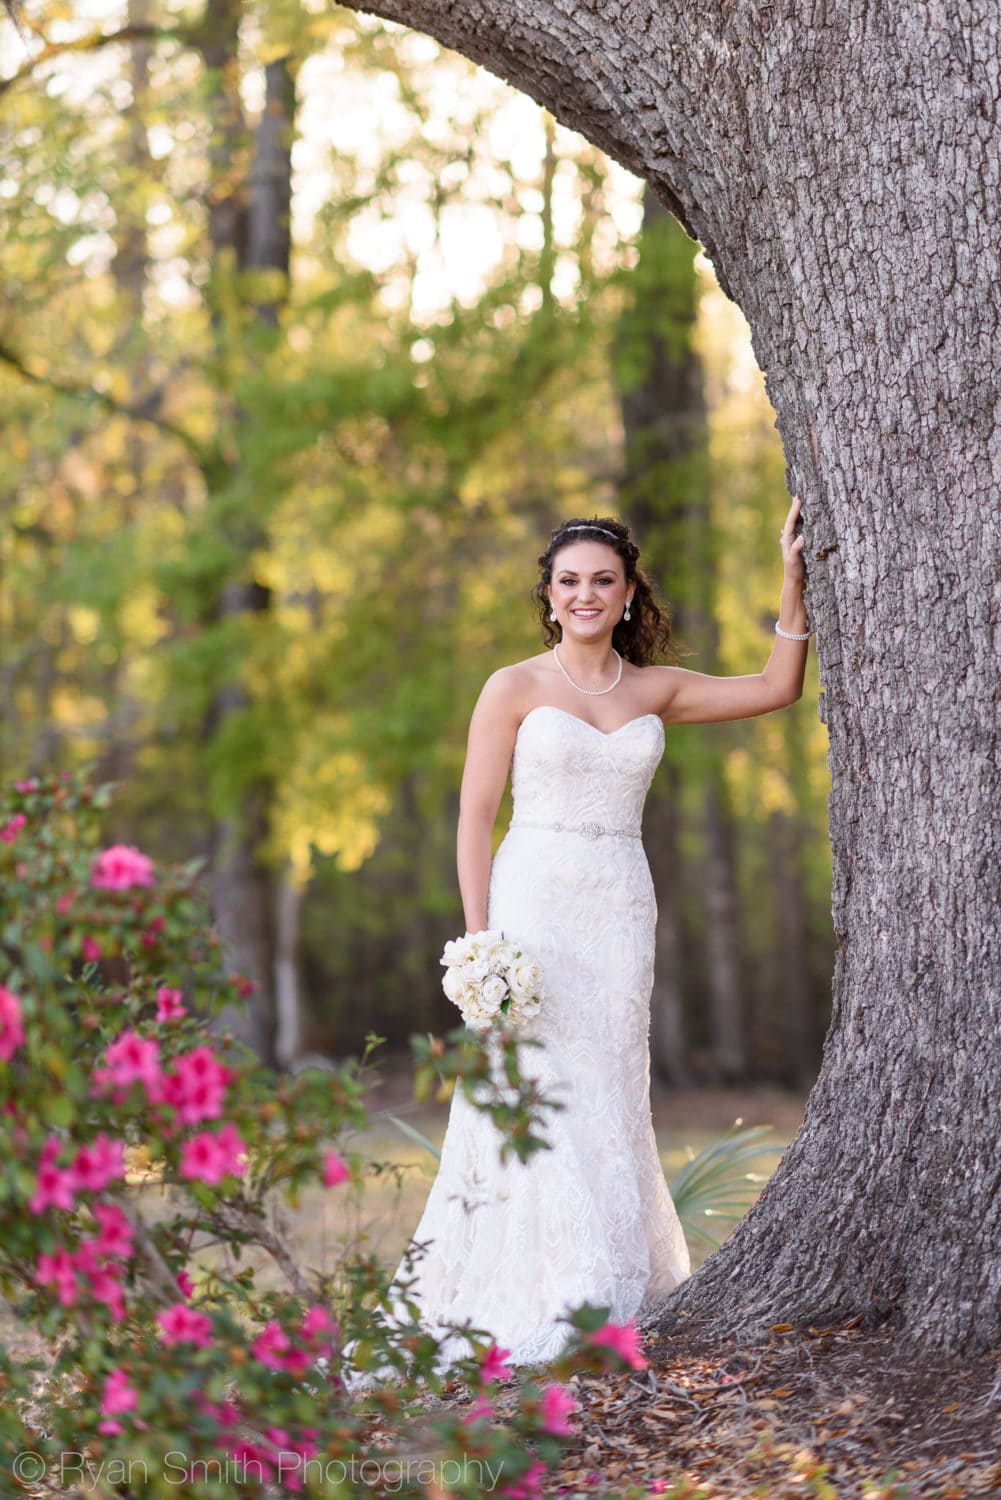 Bride leaning against a tree with flowers in the foreground  - Upper Mill Plantation